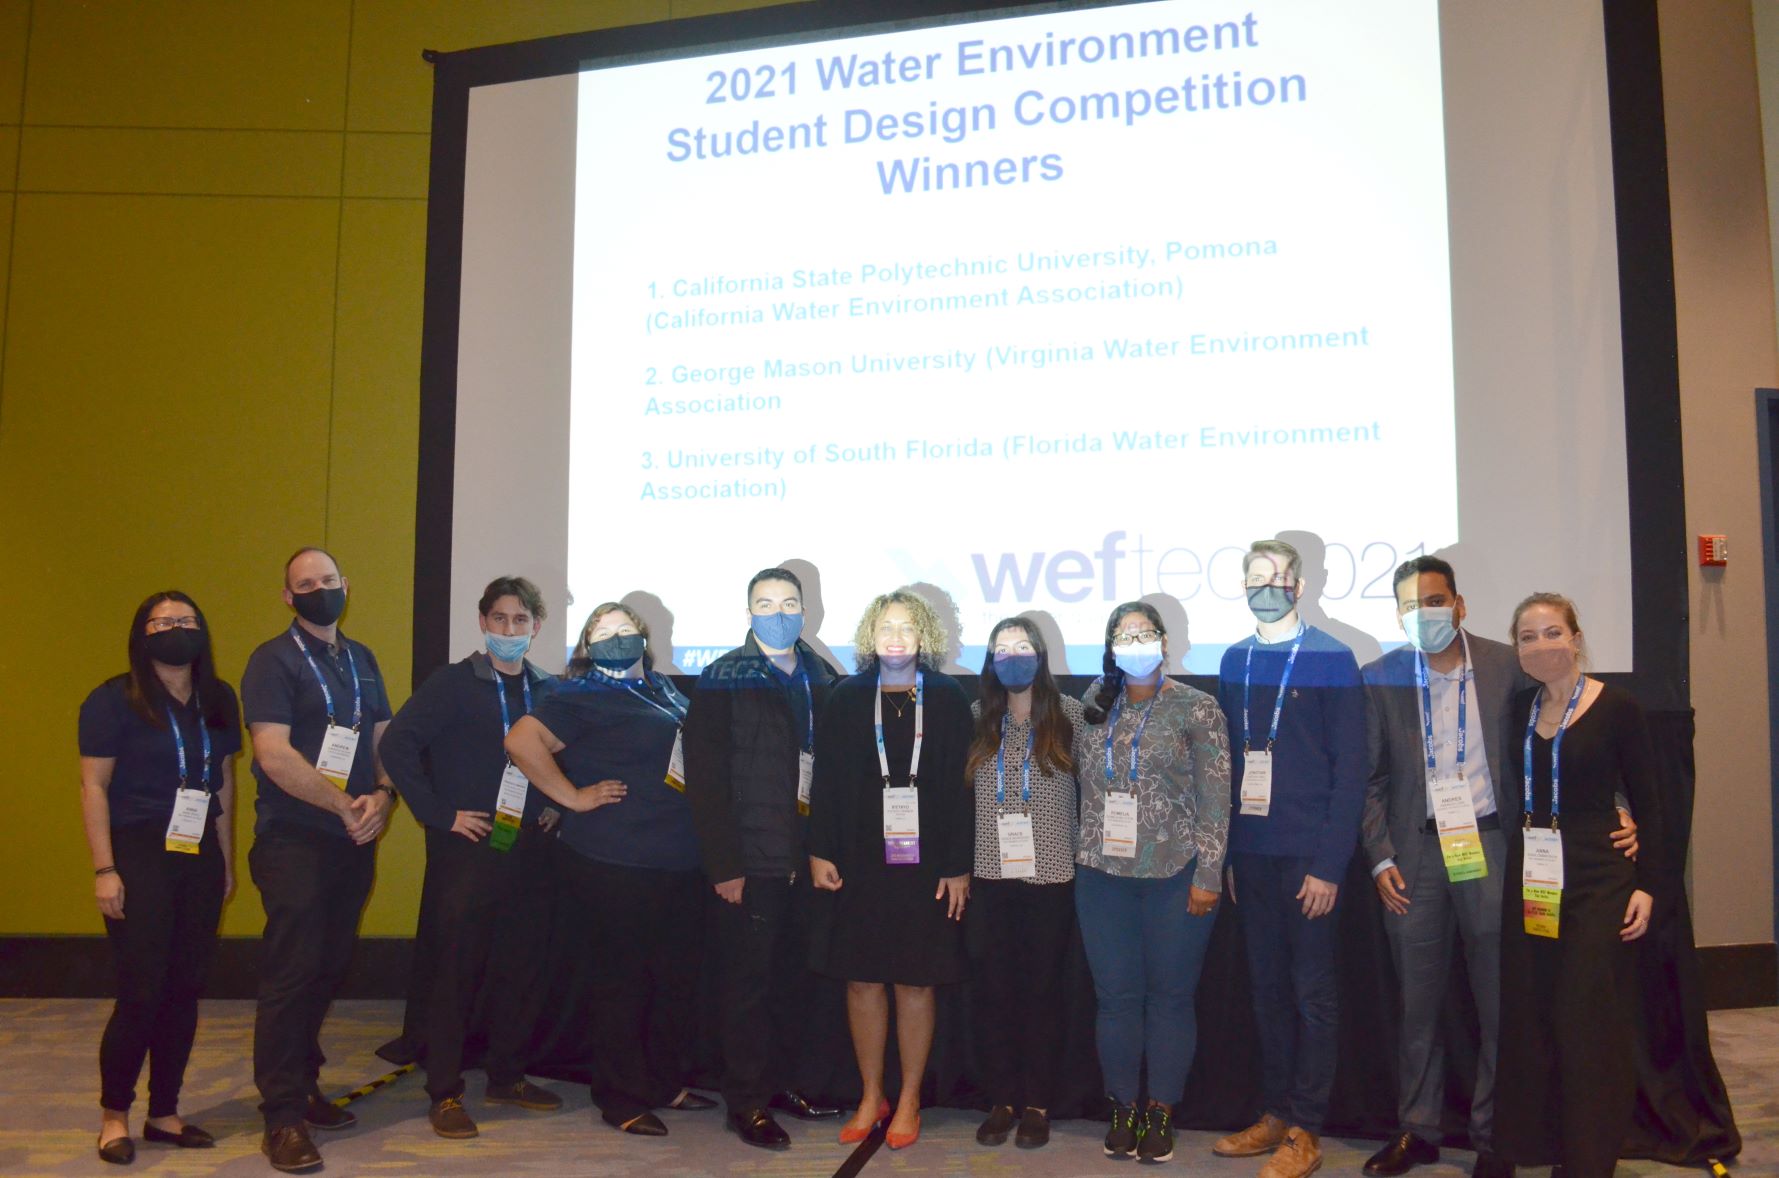 A group photo of 11 students standing in front a presentation, celebrating their victory in a student competition.